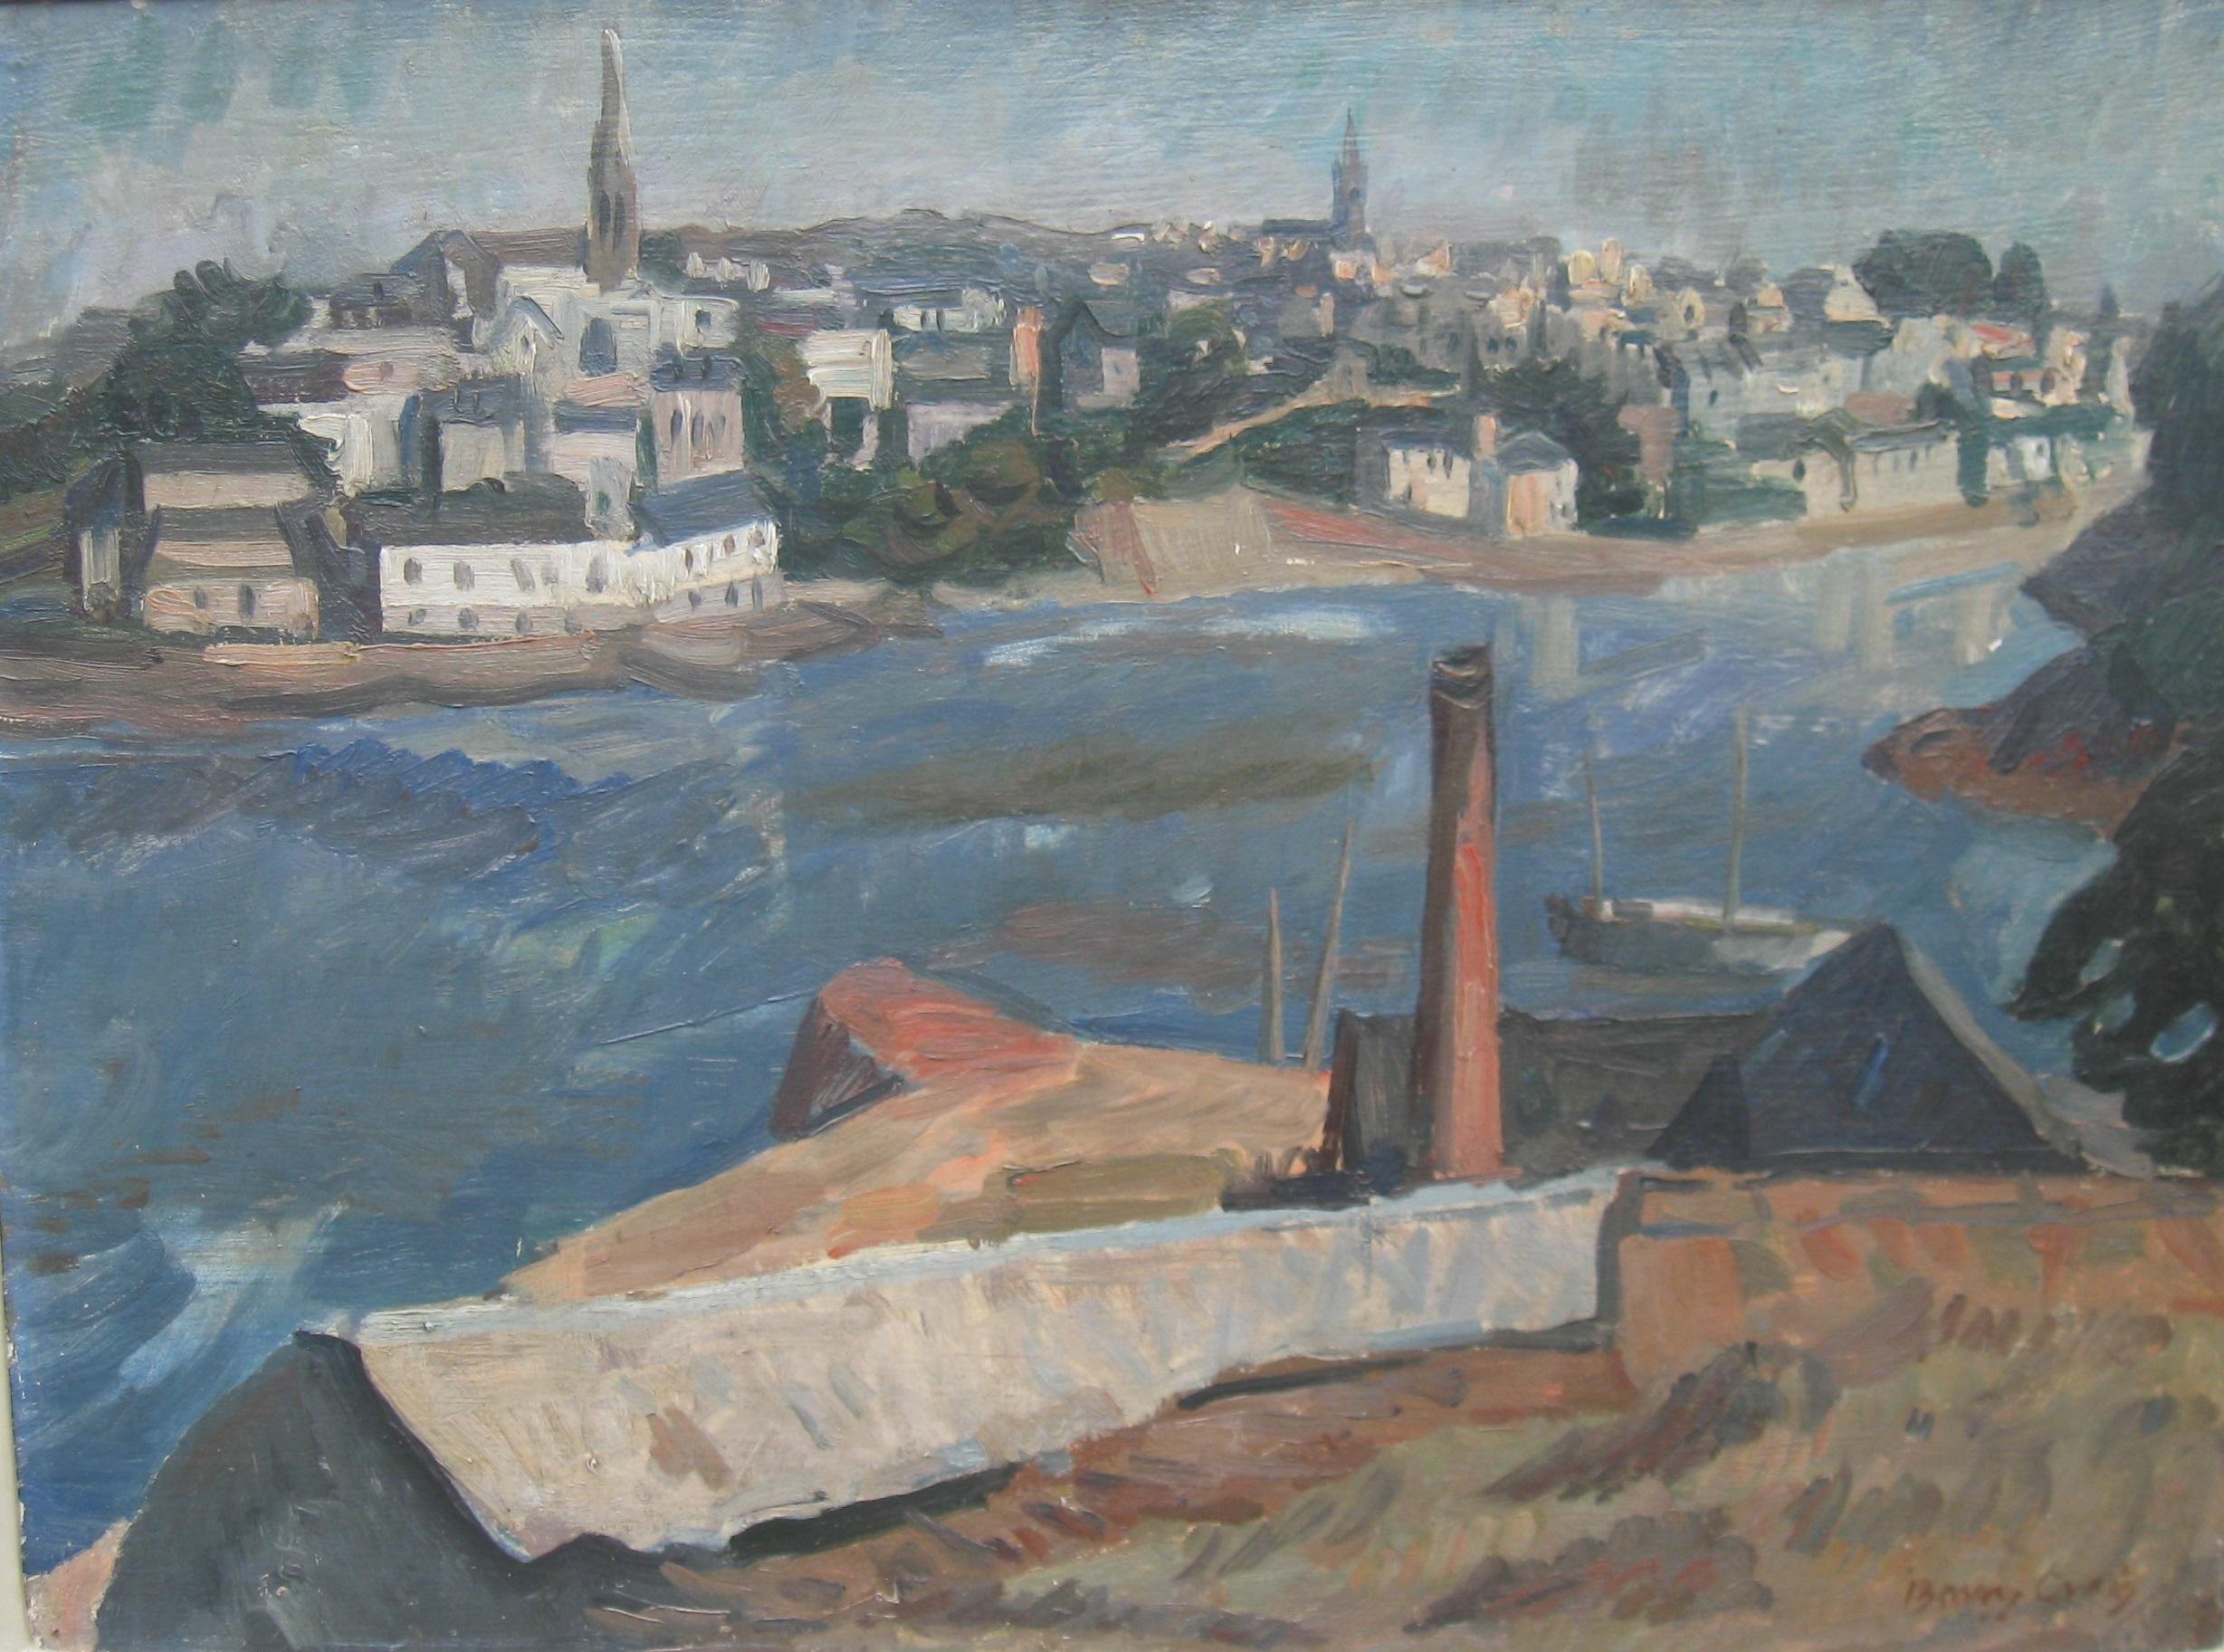 Frank Barrington Craig Landscape Painting - 'View of a Port, Brittany' large oil circa 1946